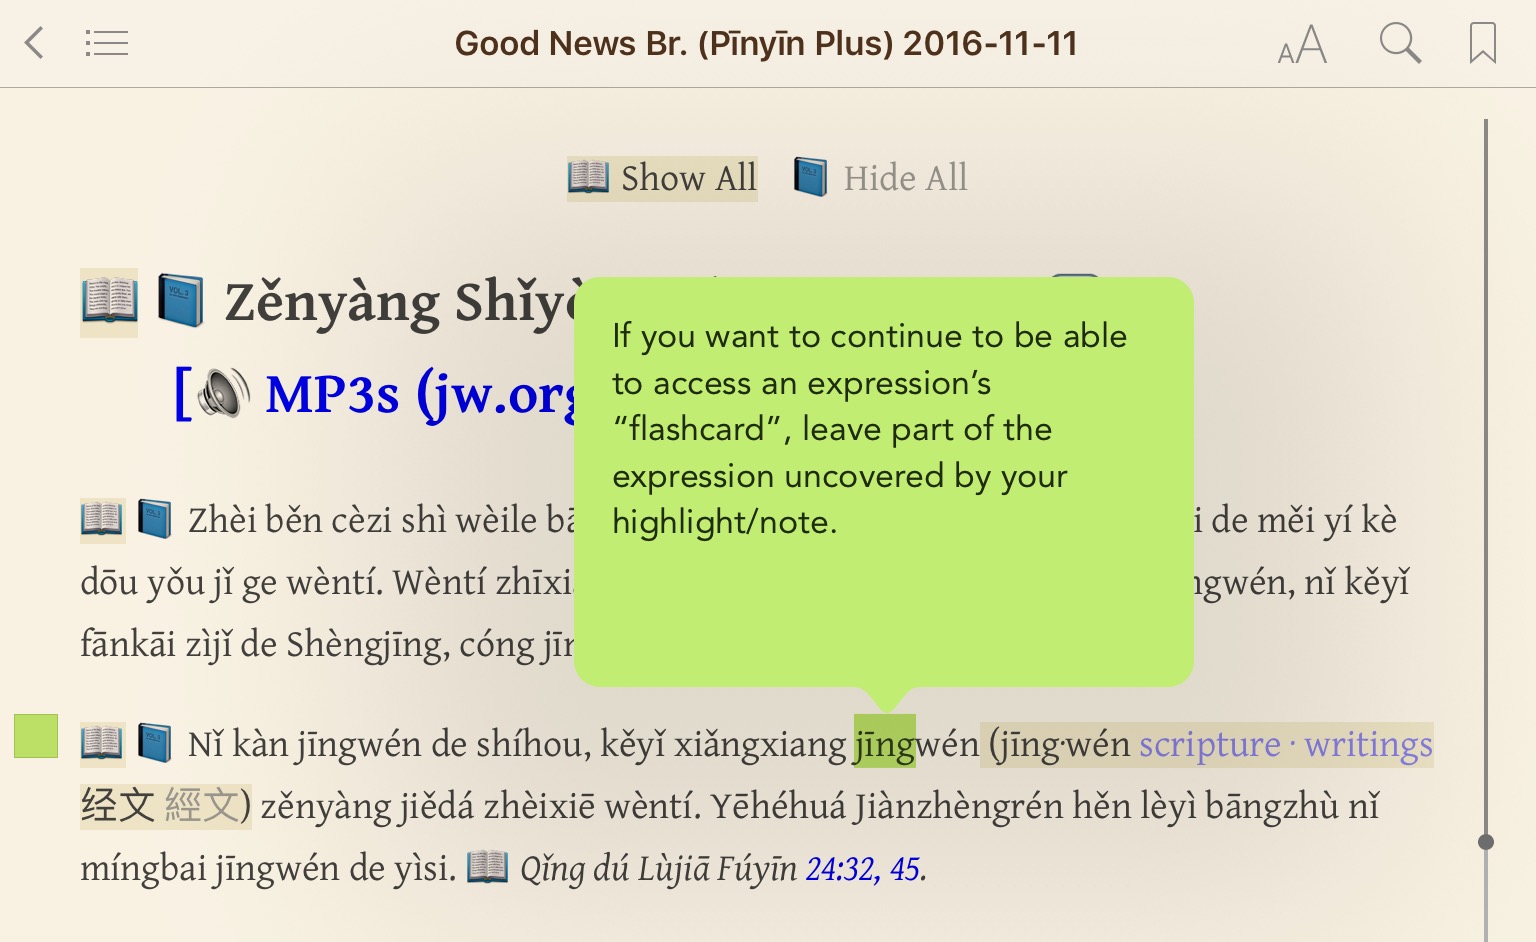 Apple Books Annotations and Pīnyīn Plus